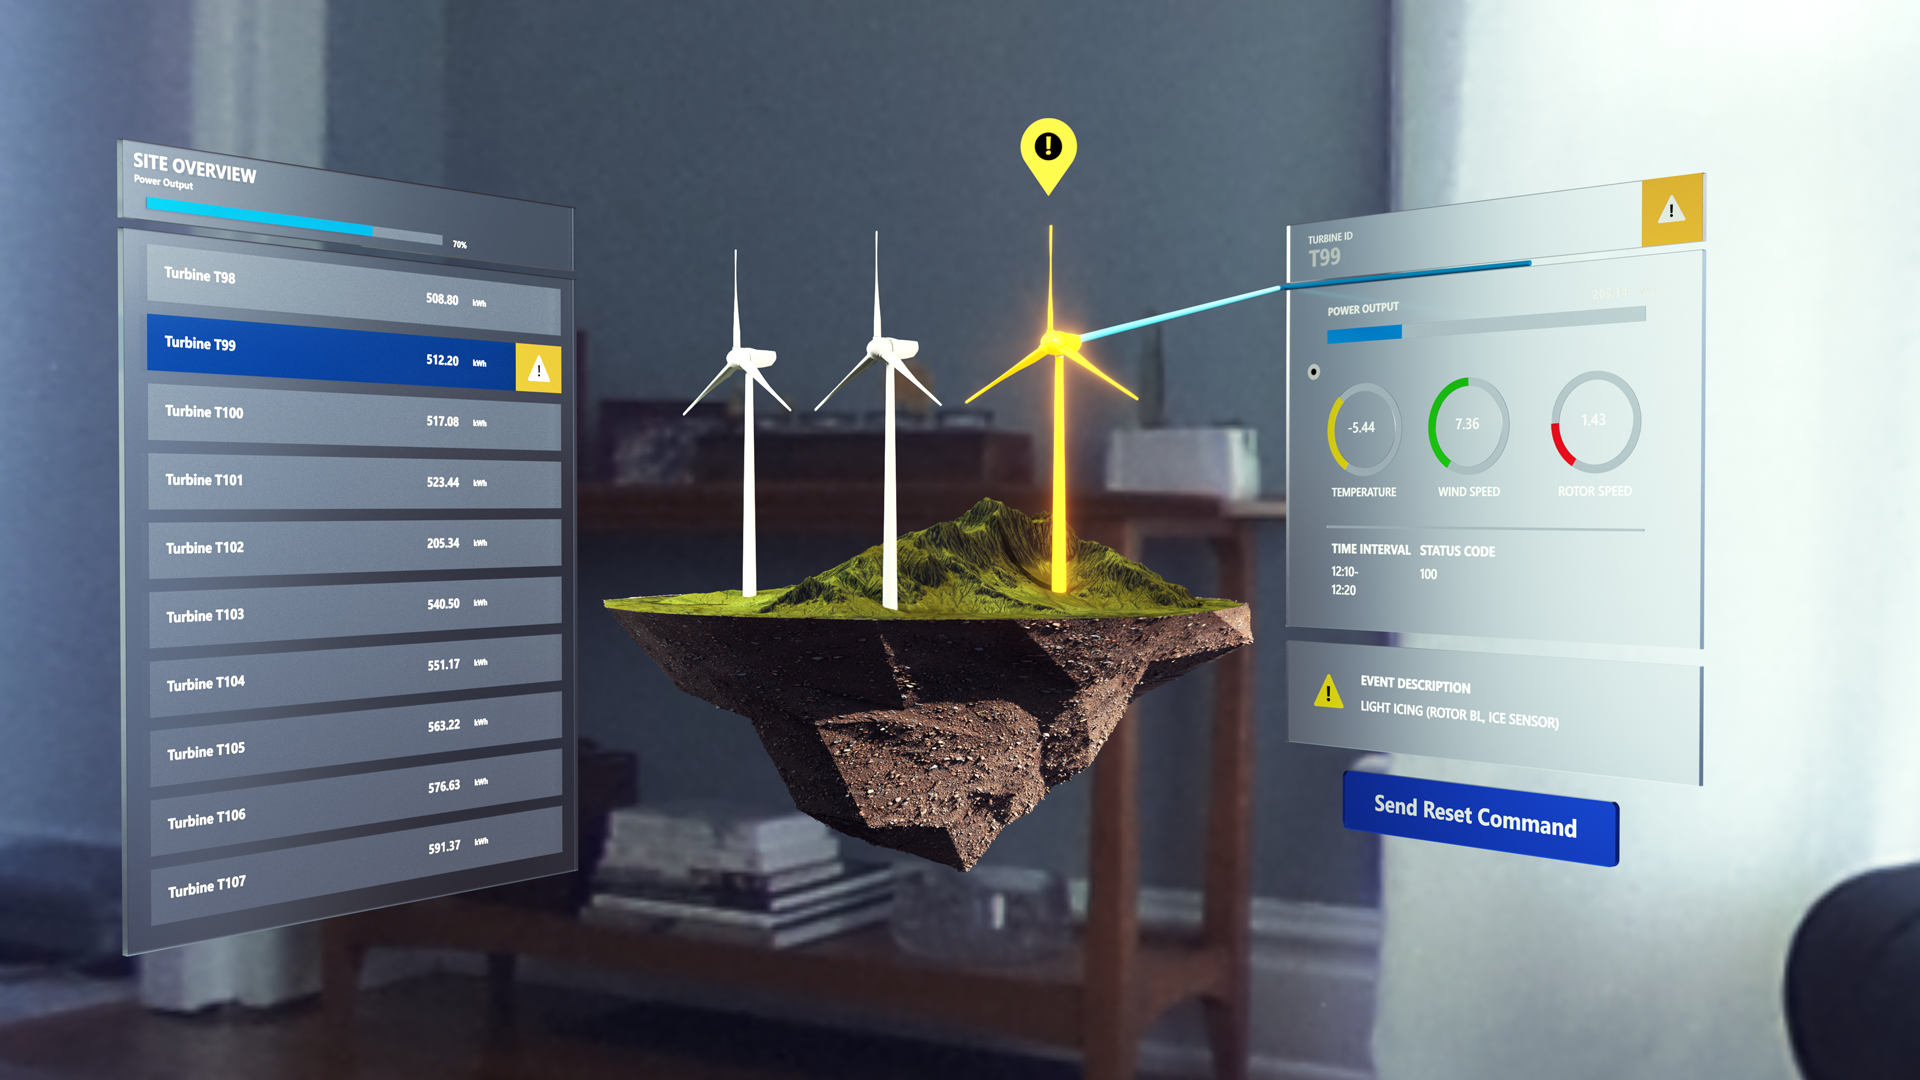 Screenshot of virtual wind farm terrain mixed-reality holographic experience overlaid on a real-world room.